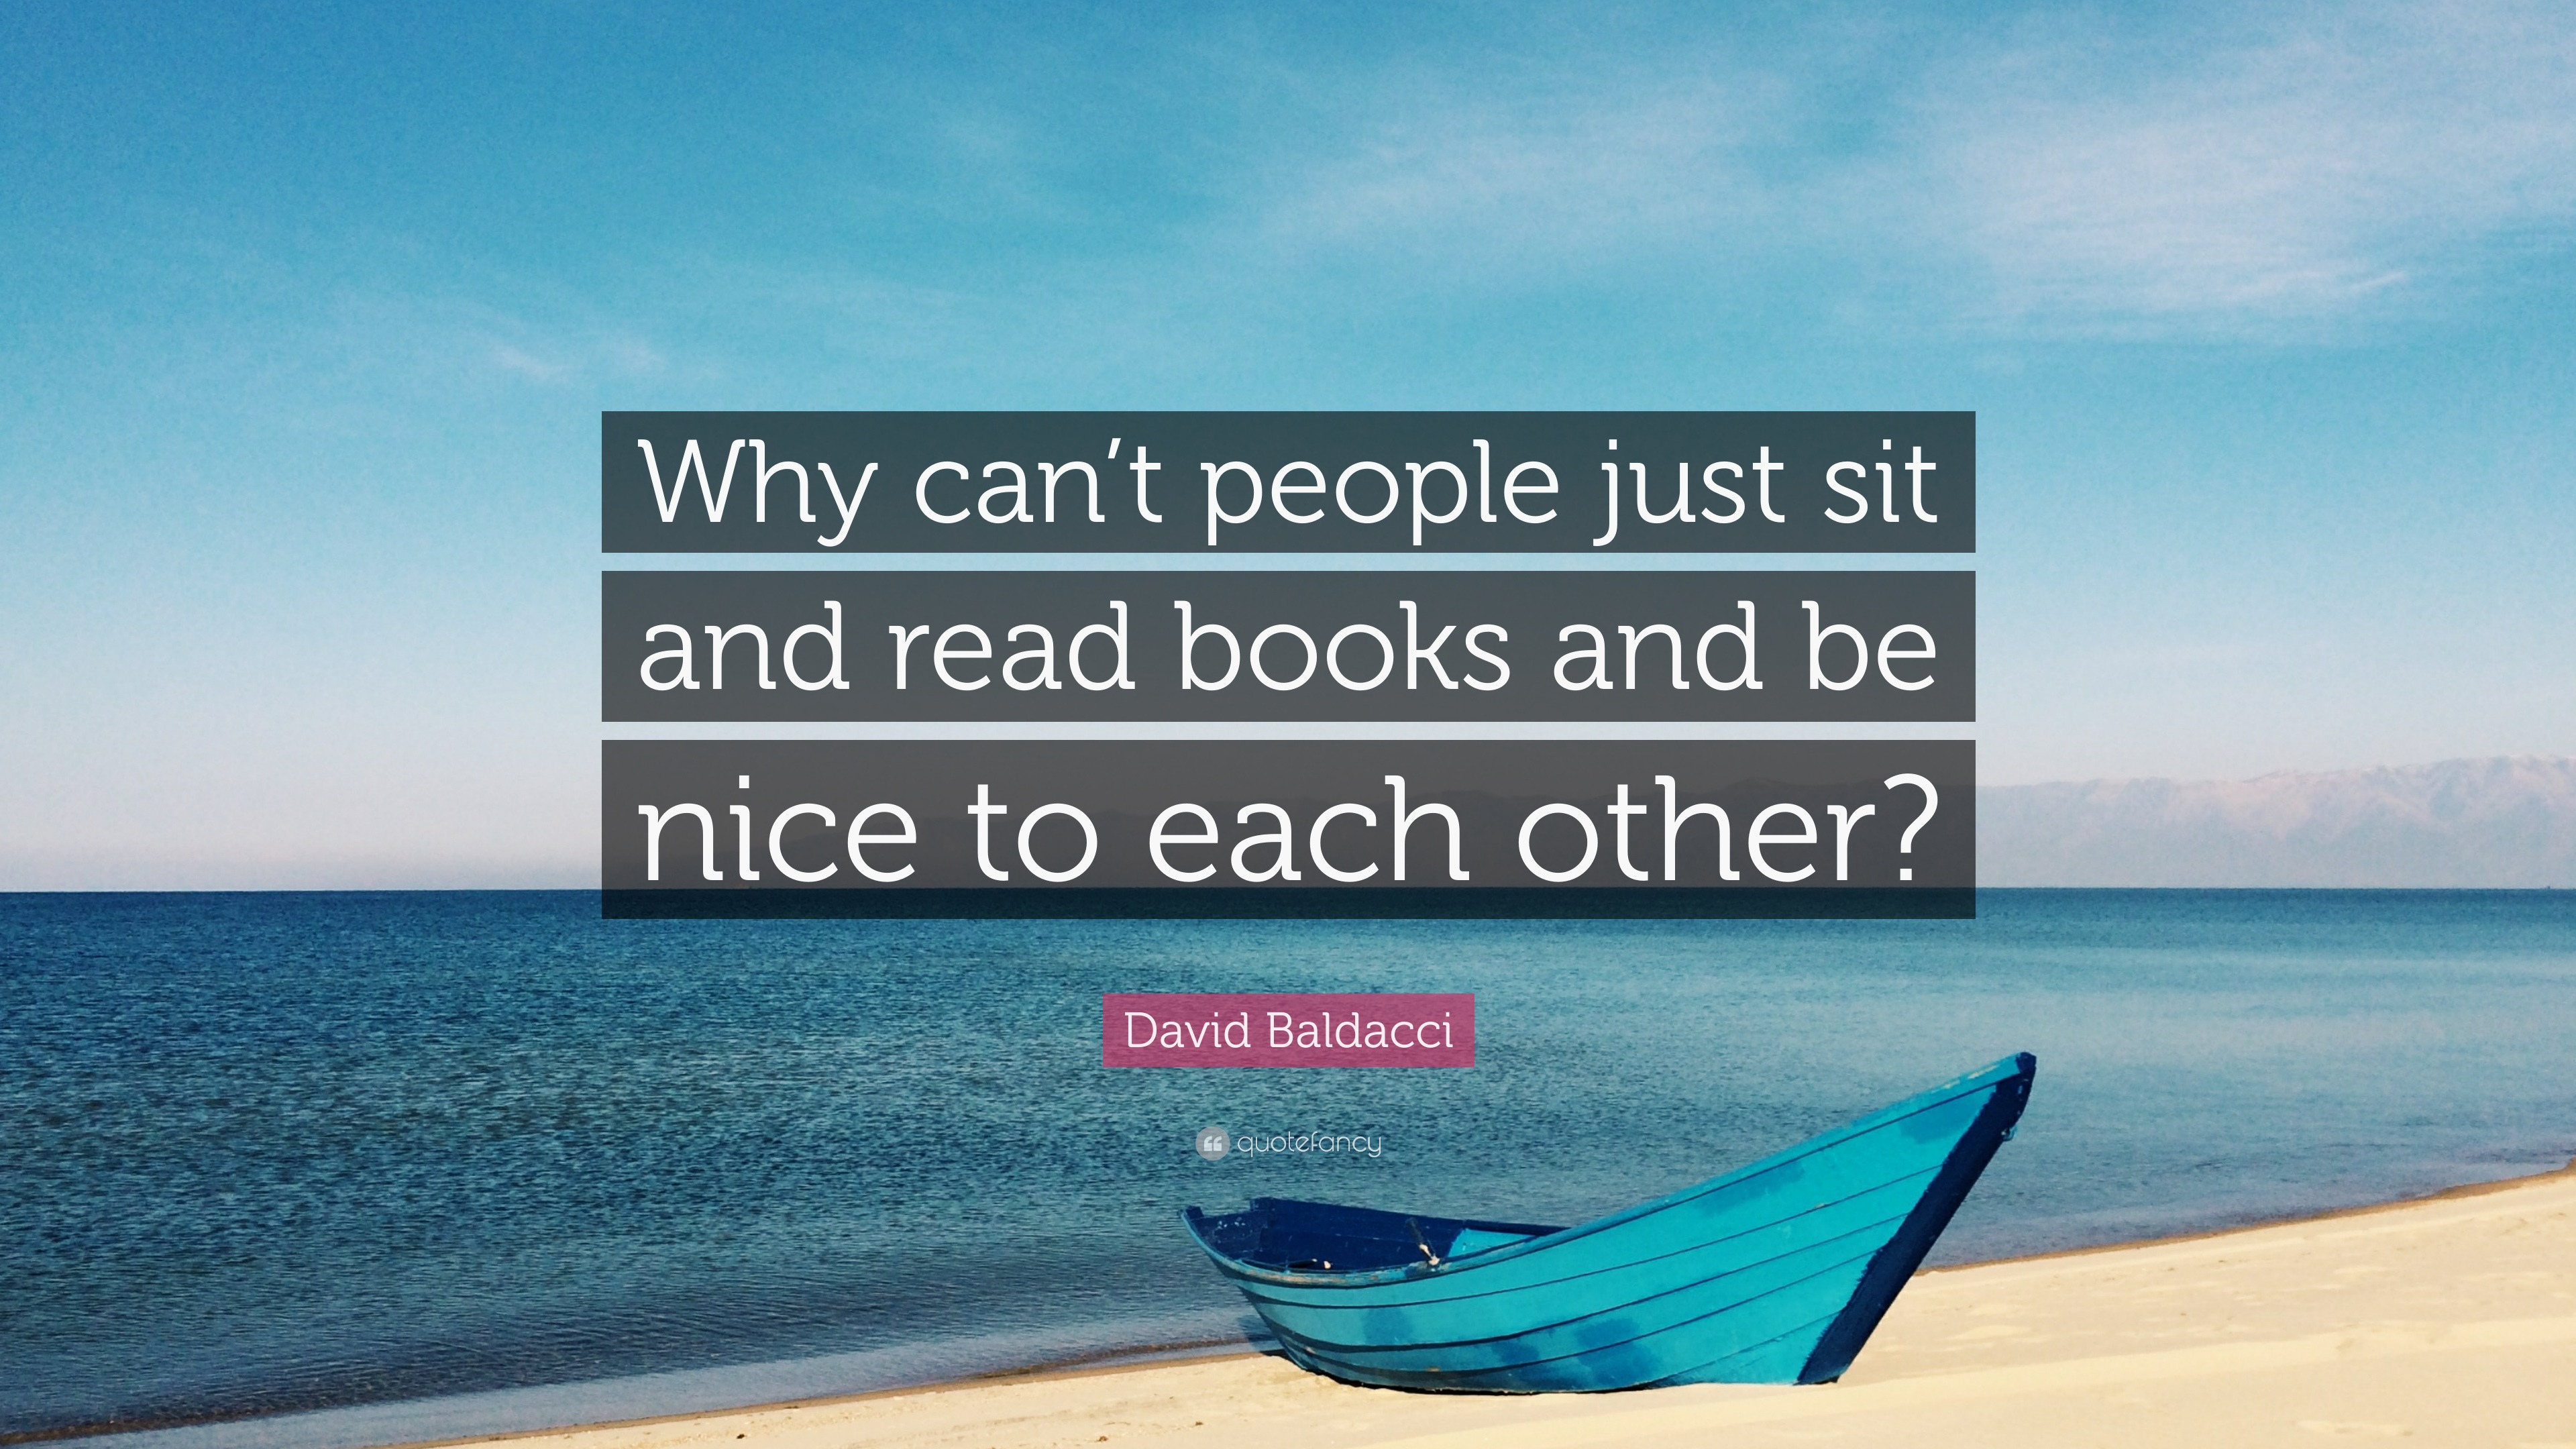 David Baldacci Quote: “Why can’t people just sit and read books and be ...